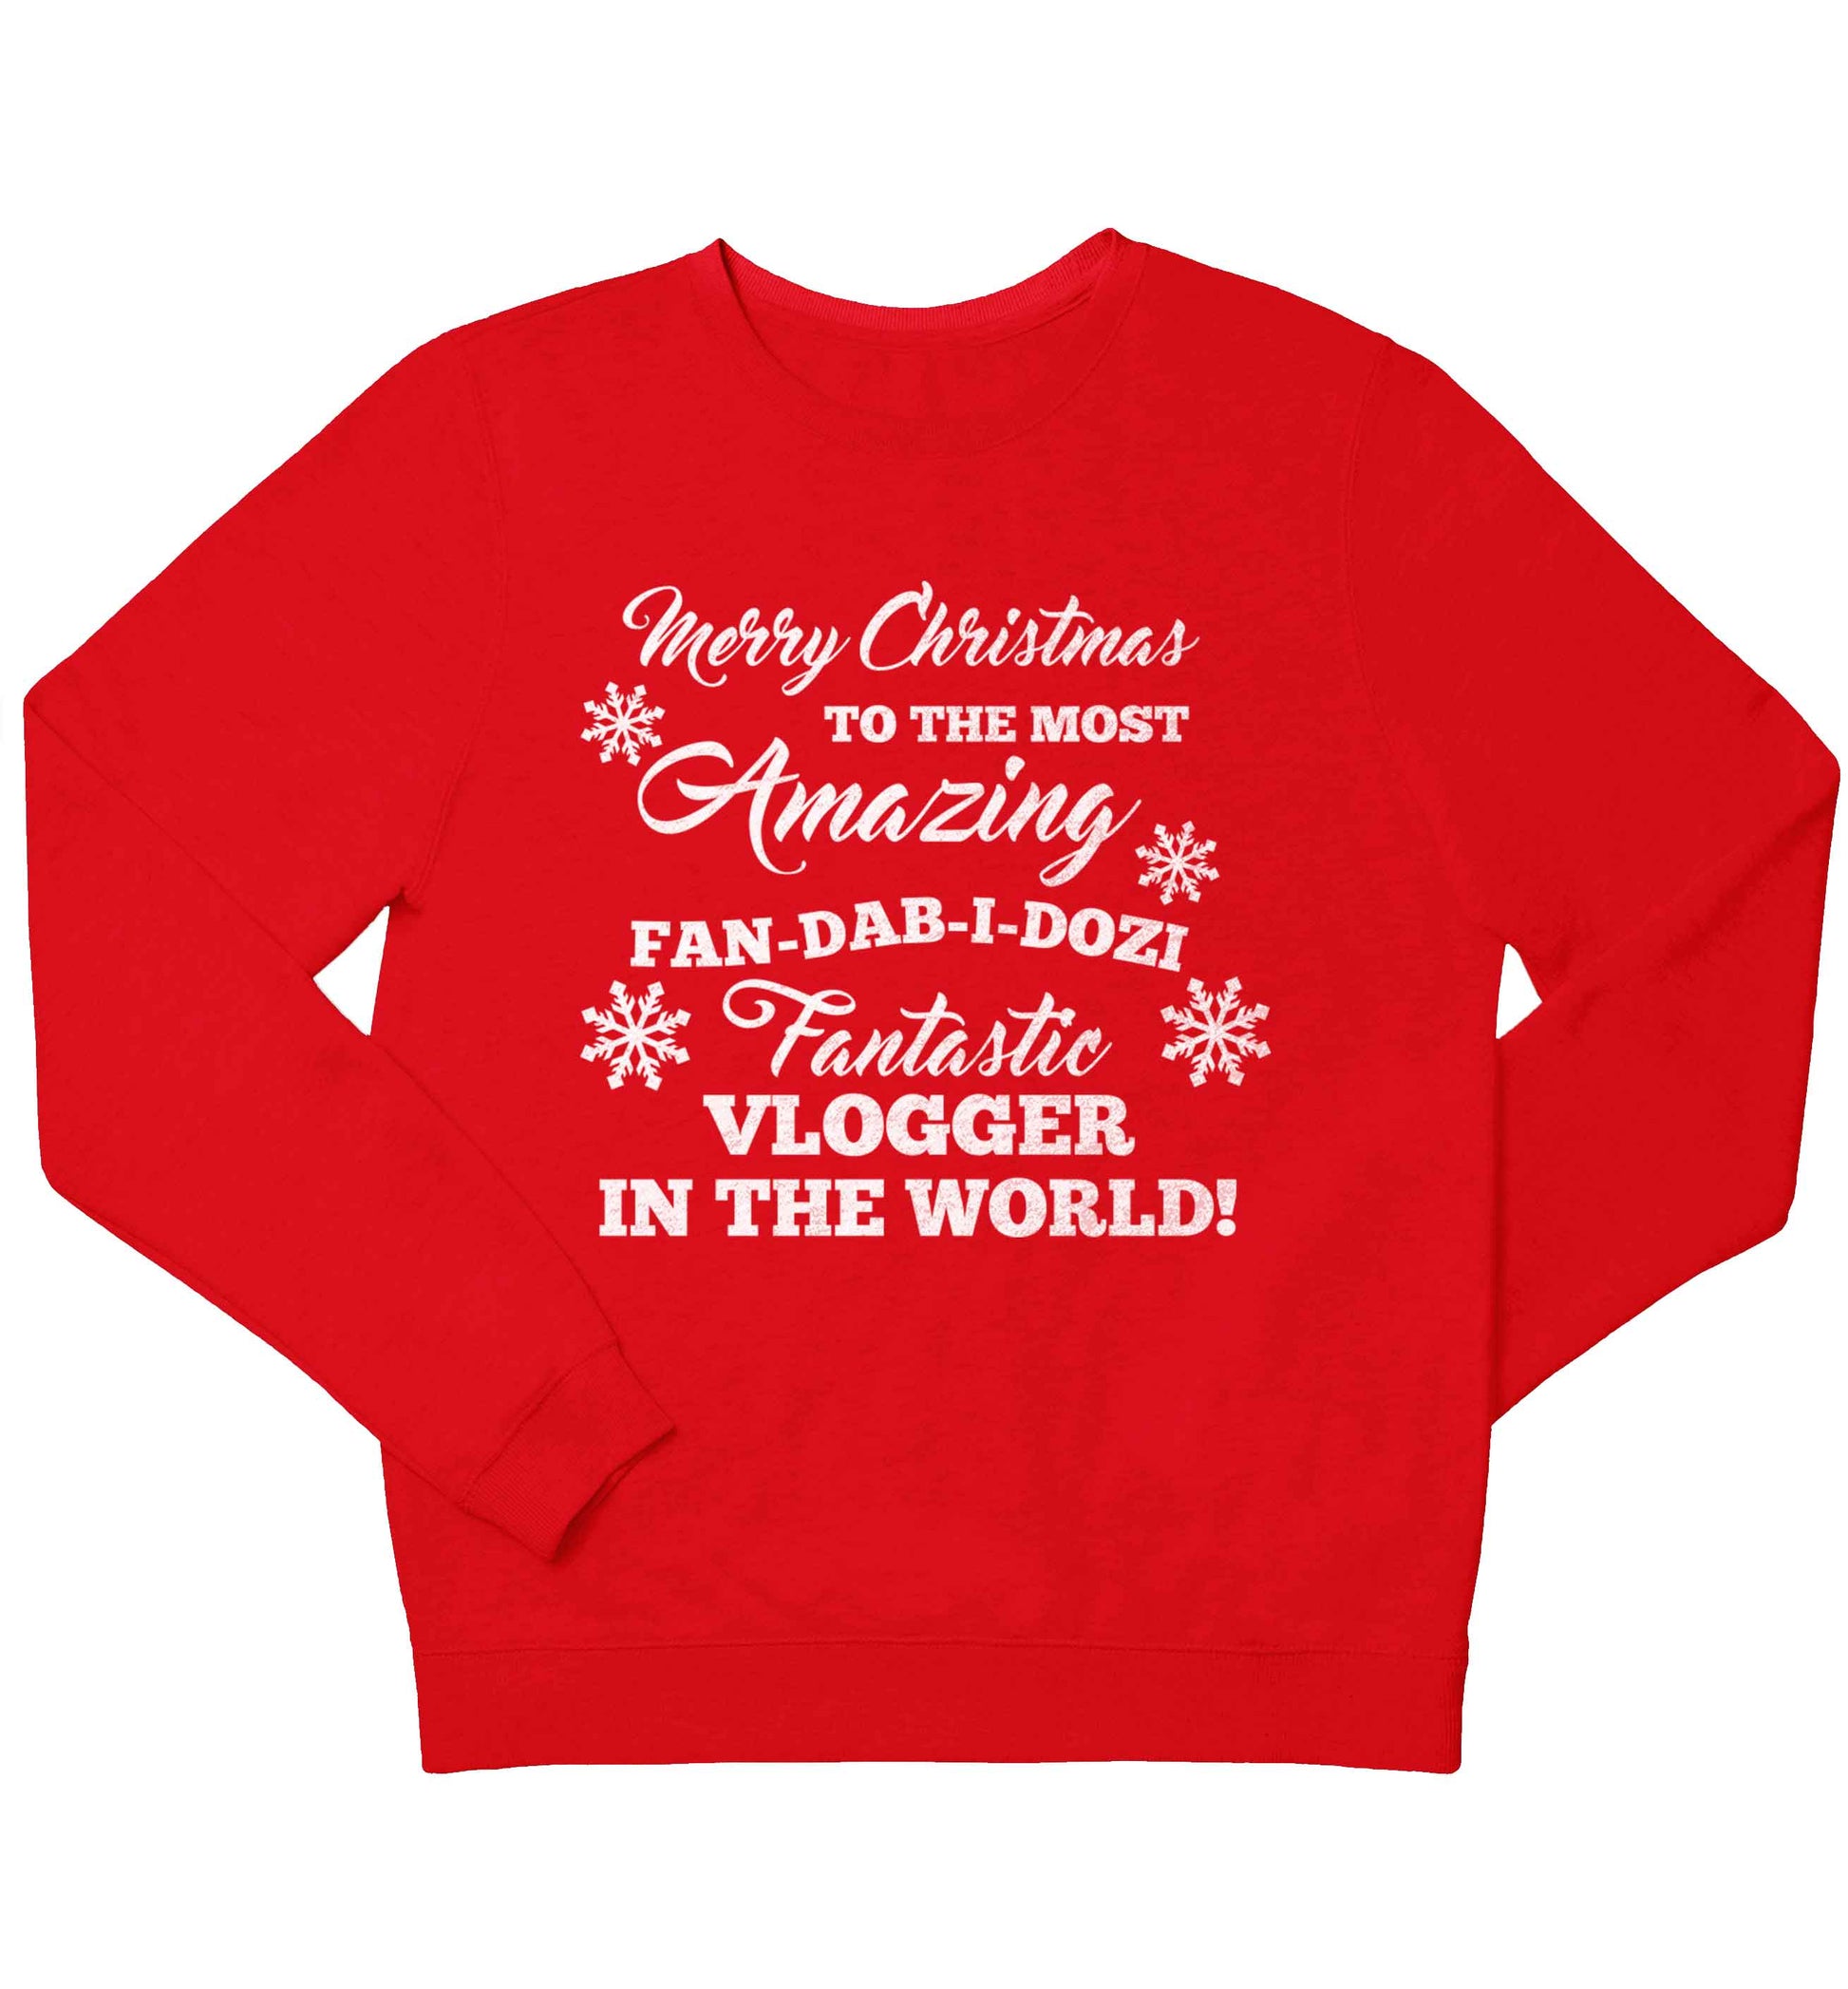 Merry Christmas to the most amazing fan-dab-i-dozi fantasic vlogger in the world children's grey sweater 12-13 Years